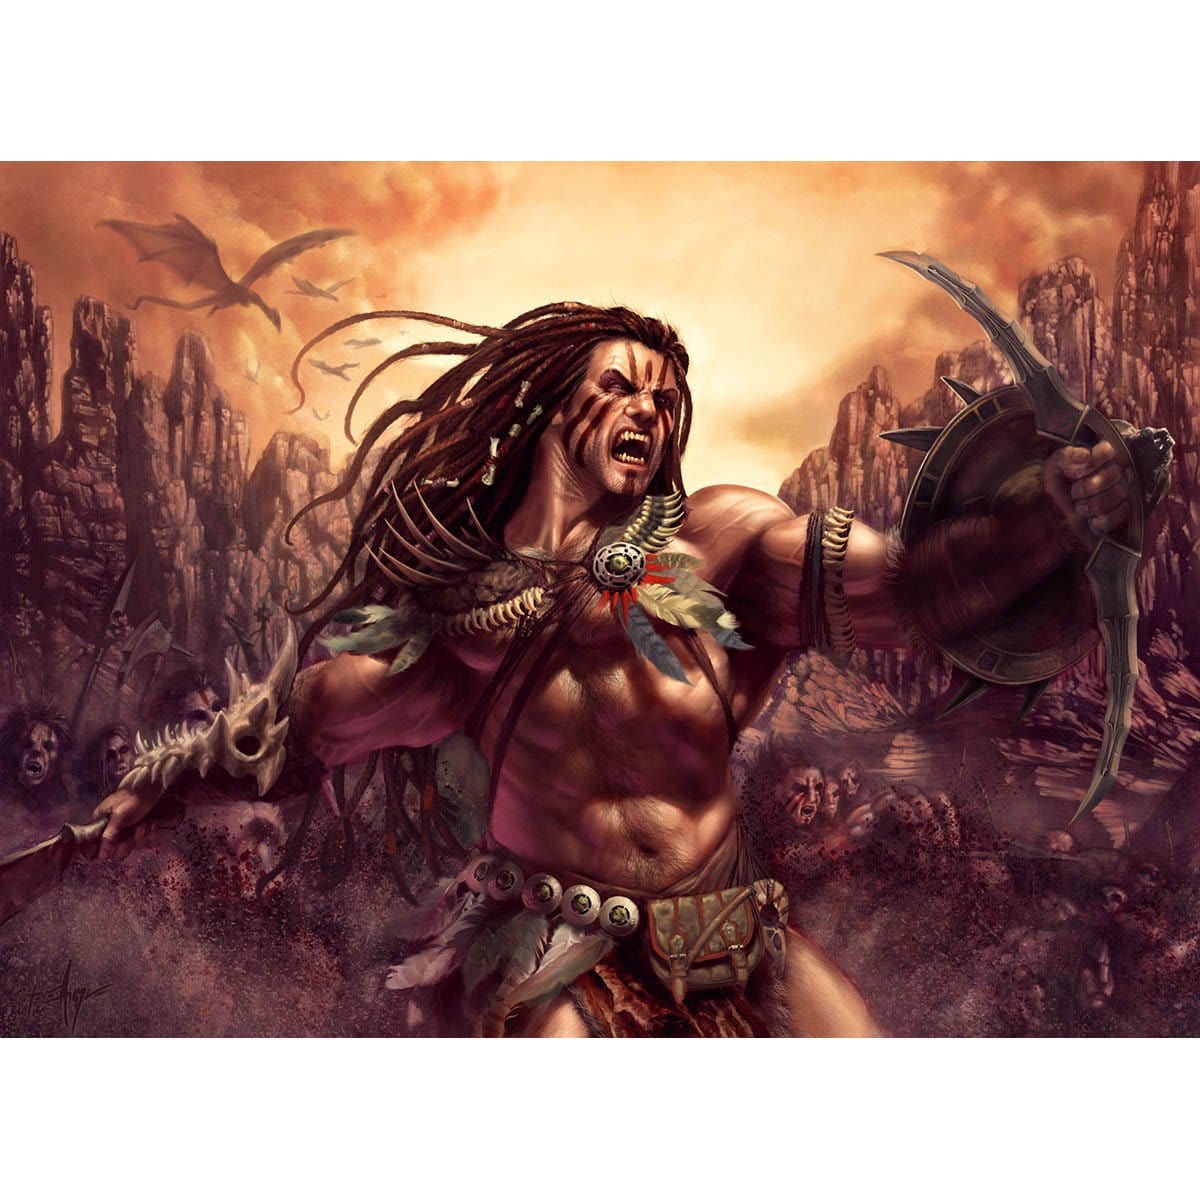 Kresh the Bloodbraided Print - Print - Original Magic Art - Accessories for Magic the Gathering and other card games